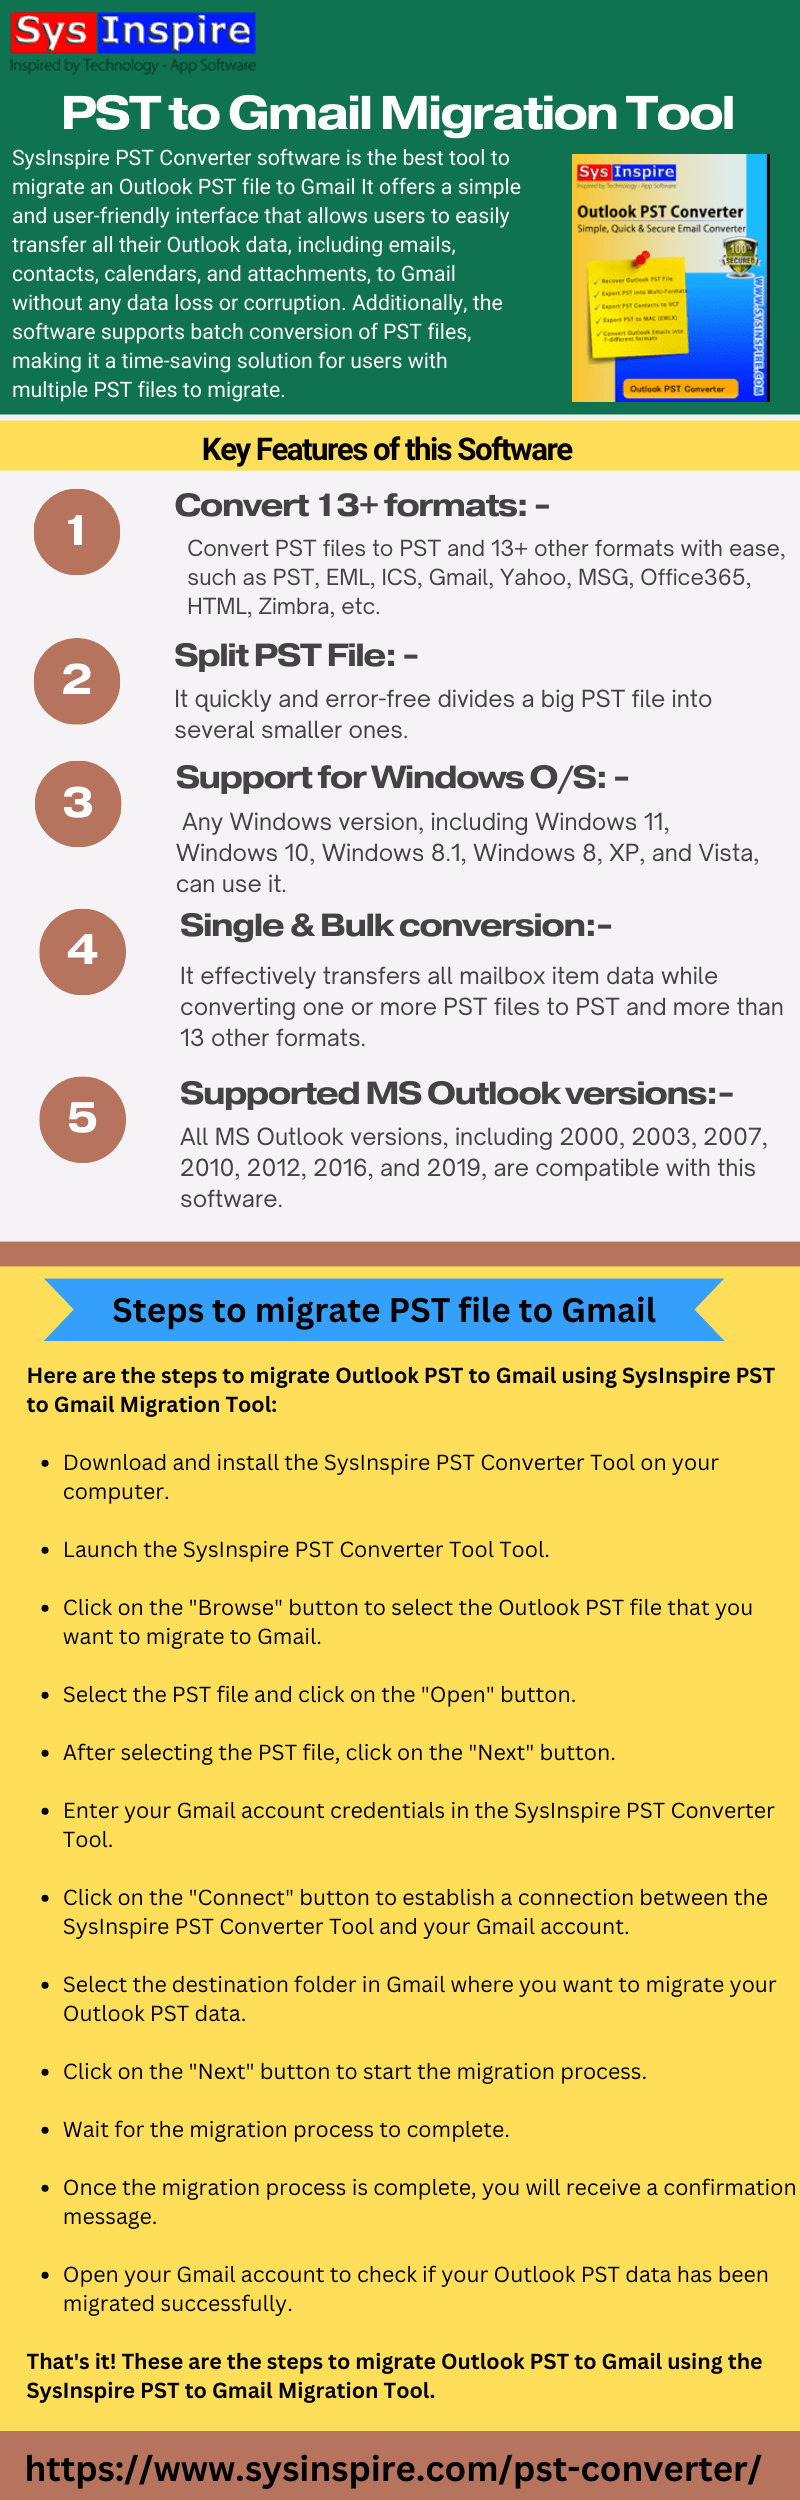 pst-to-gmail-migration-tool.png